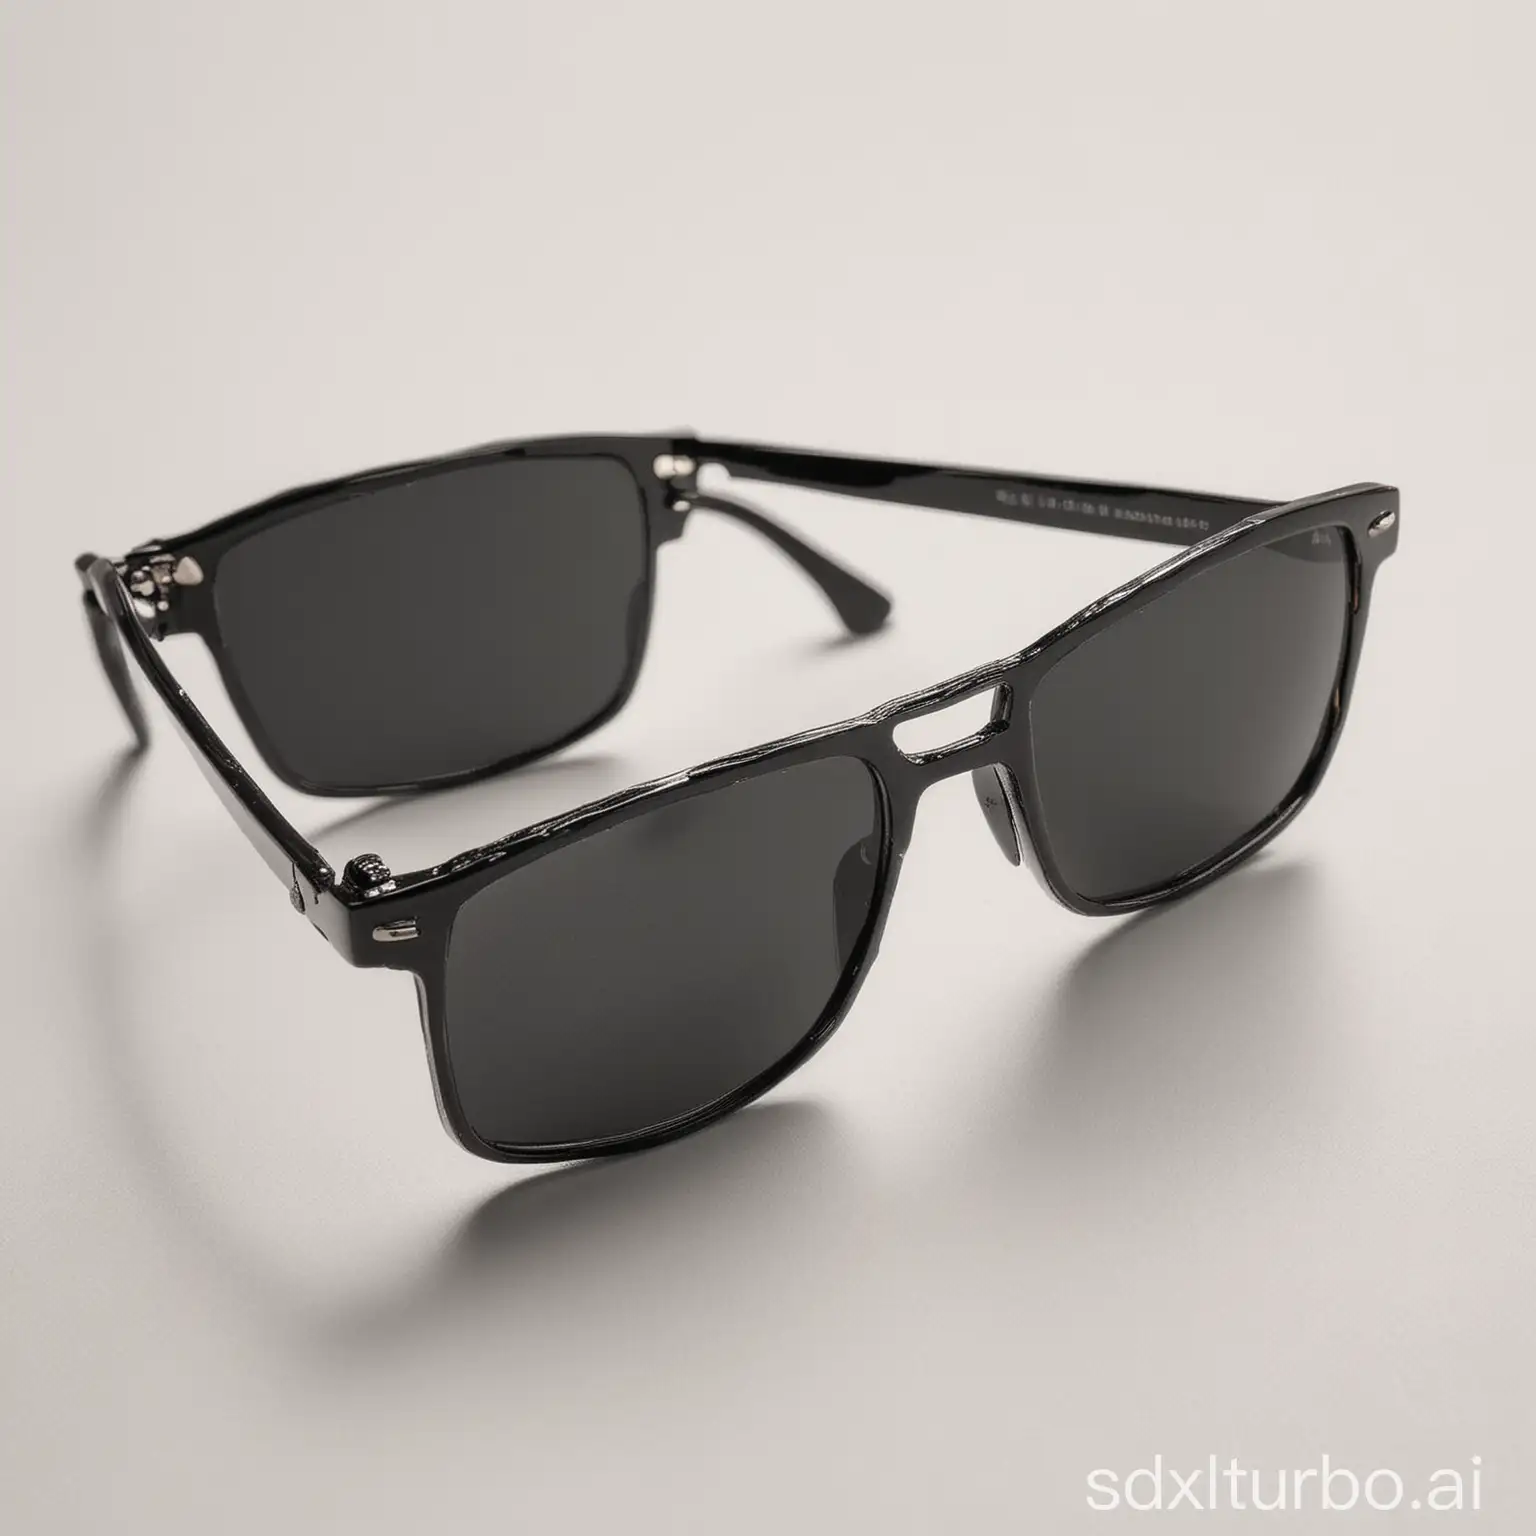 A close-up of a pair of sunglasses resting on a white surface. The sunglasses are made of a shiny, black metal and have a sleek, rectangular shape. The lenses are a dark, neutral color.